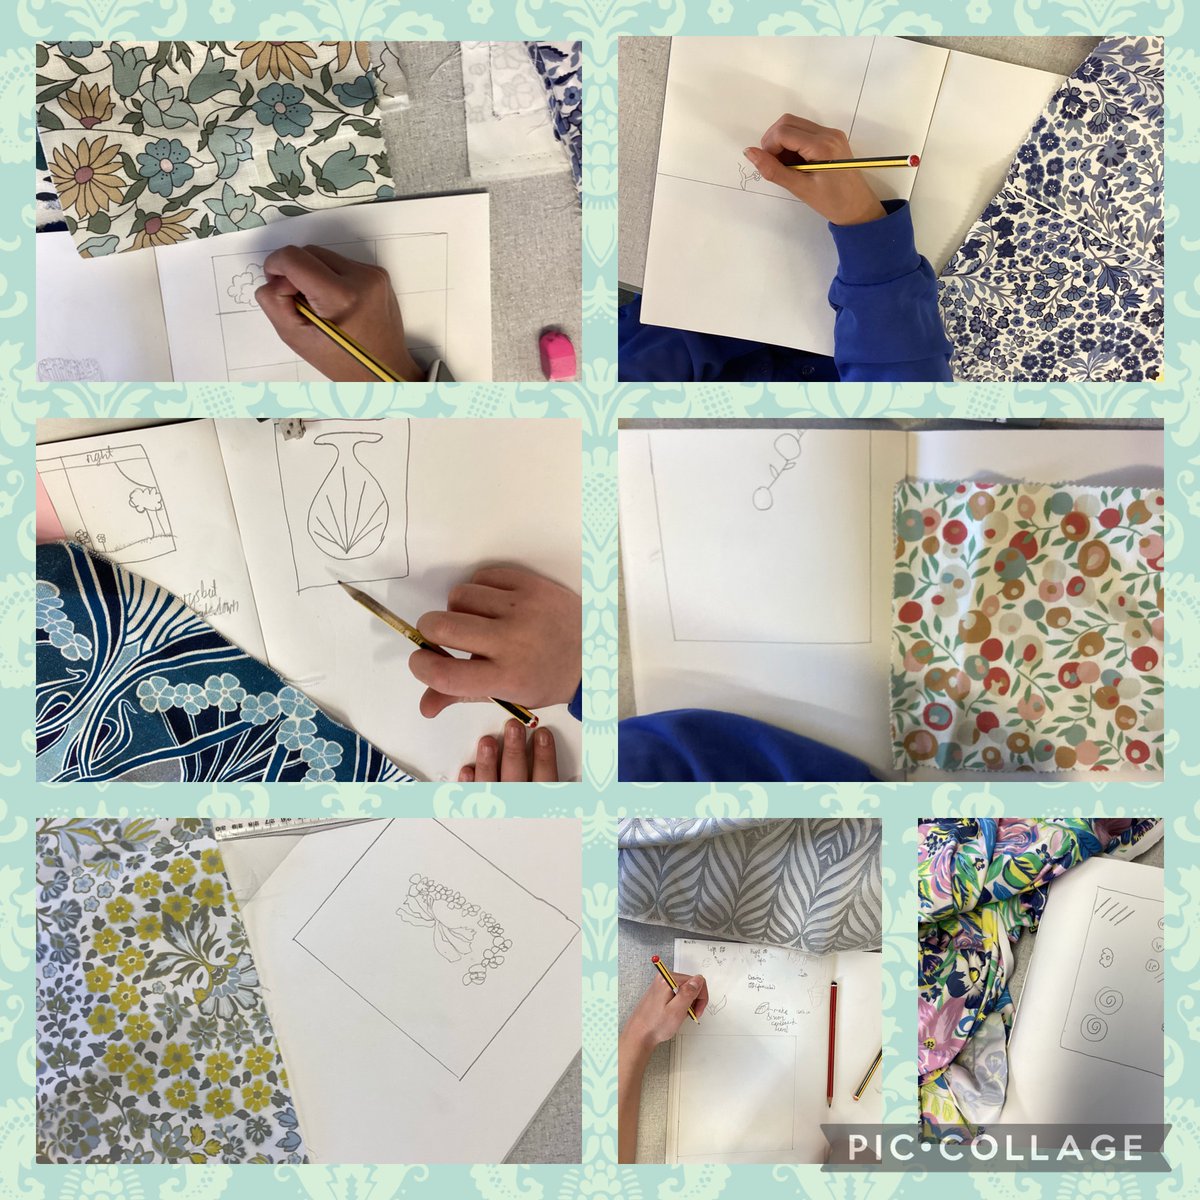 Today, we have started our ’Painted Fabrics’ art topic. We have been looking at examples of Liberty fabrics (kindly donated by @LibertyLondon ) to inspire our designs for our printing blocks. We’re feeling very inspired by the fabrics we’ve seen. 💜